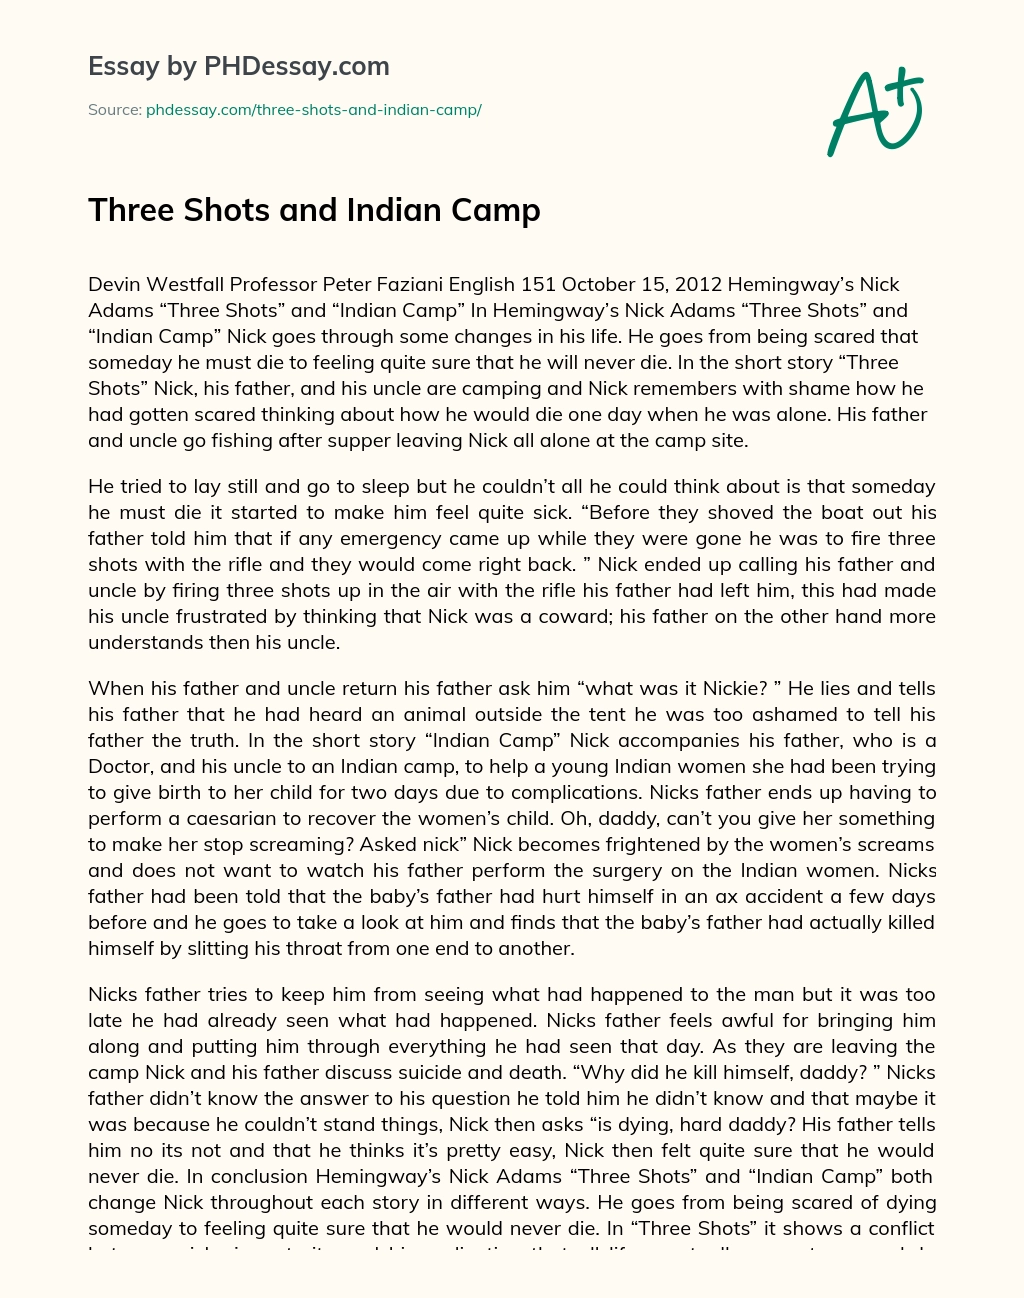 Three Shots and Indian Camp essay